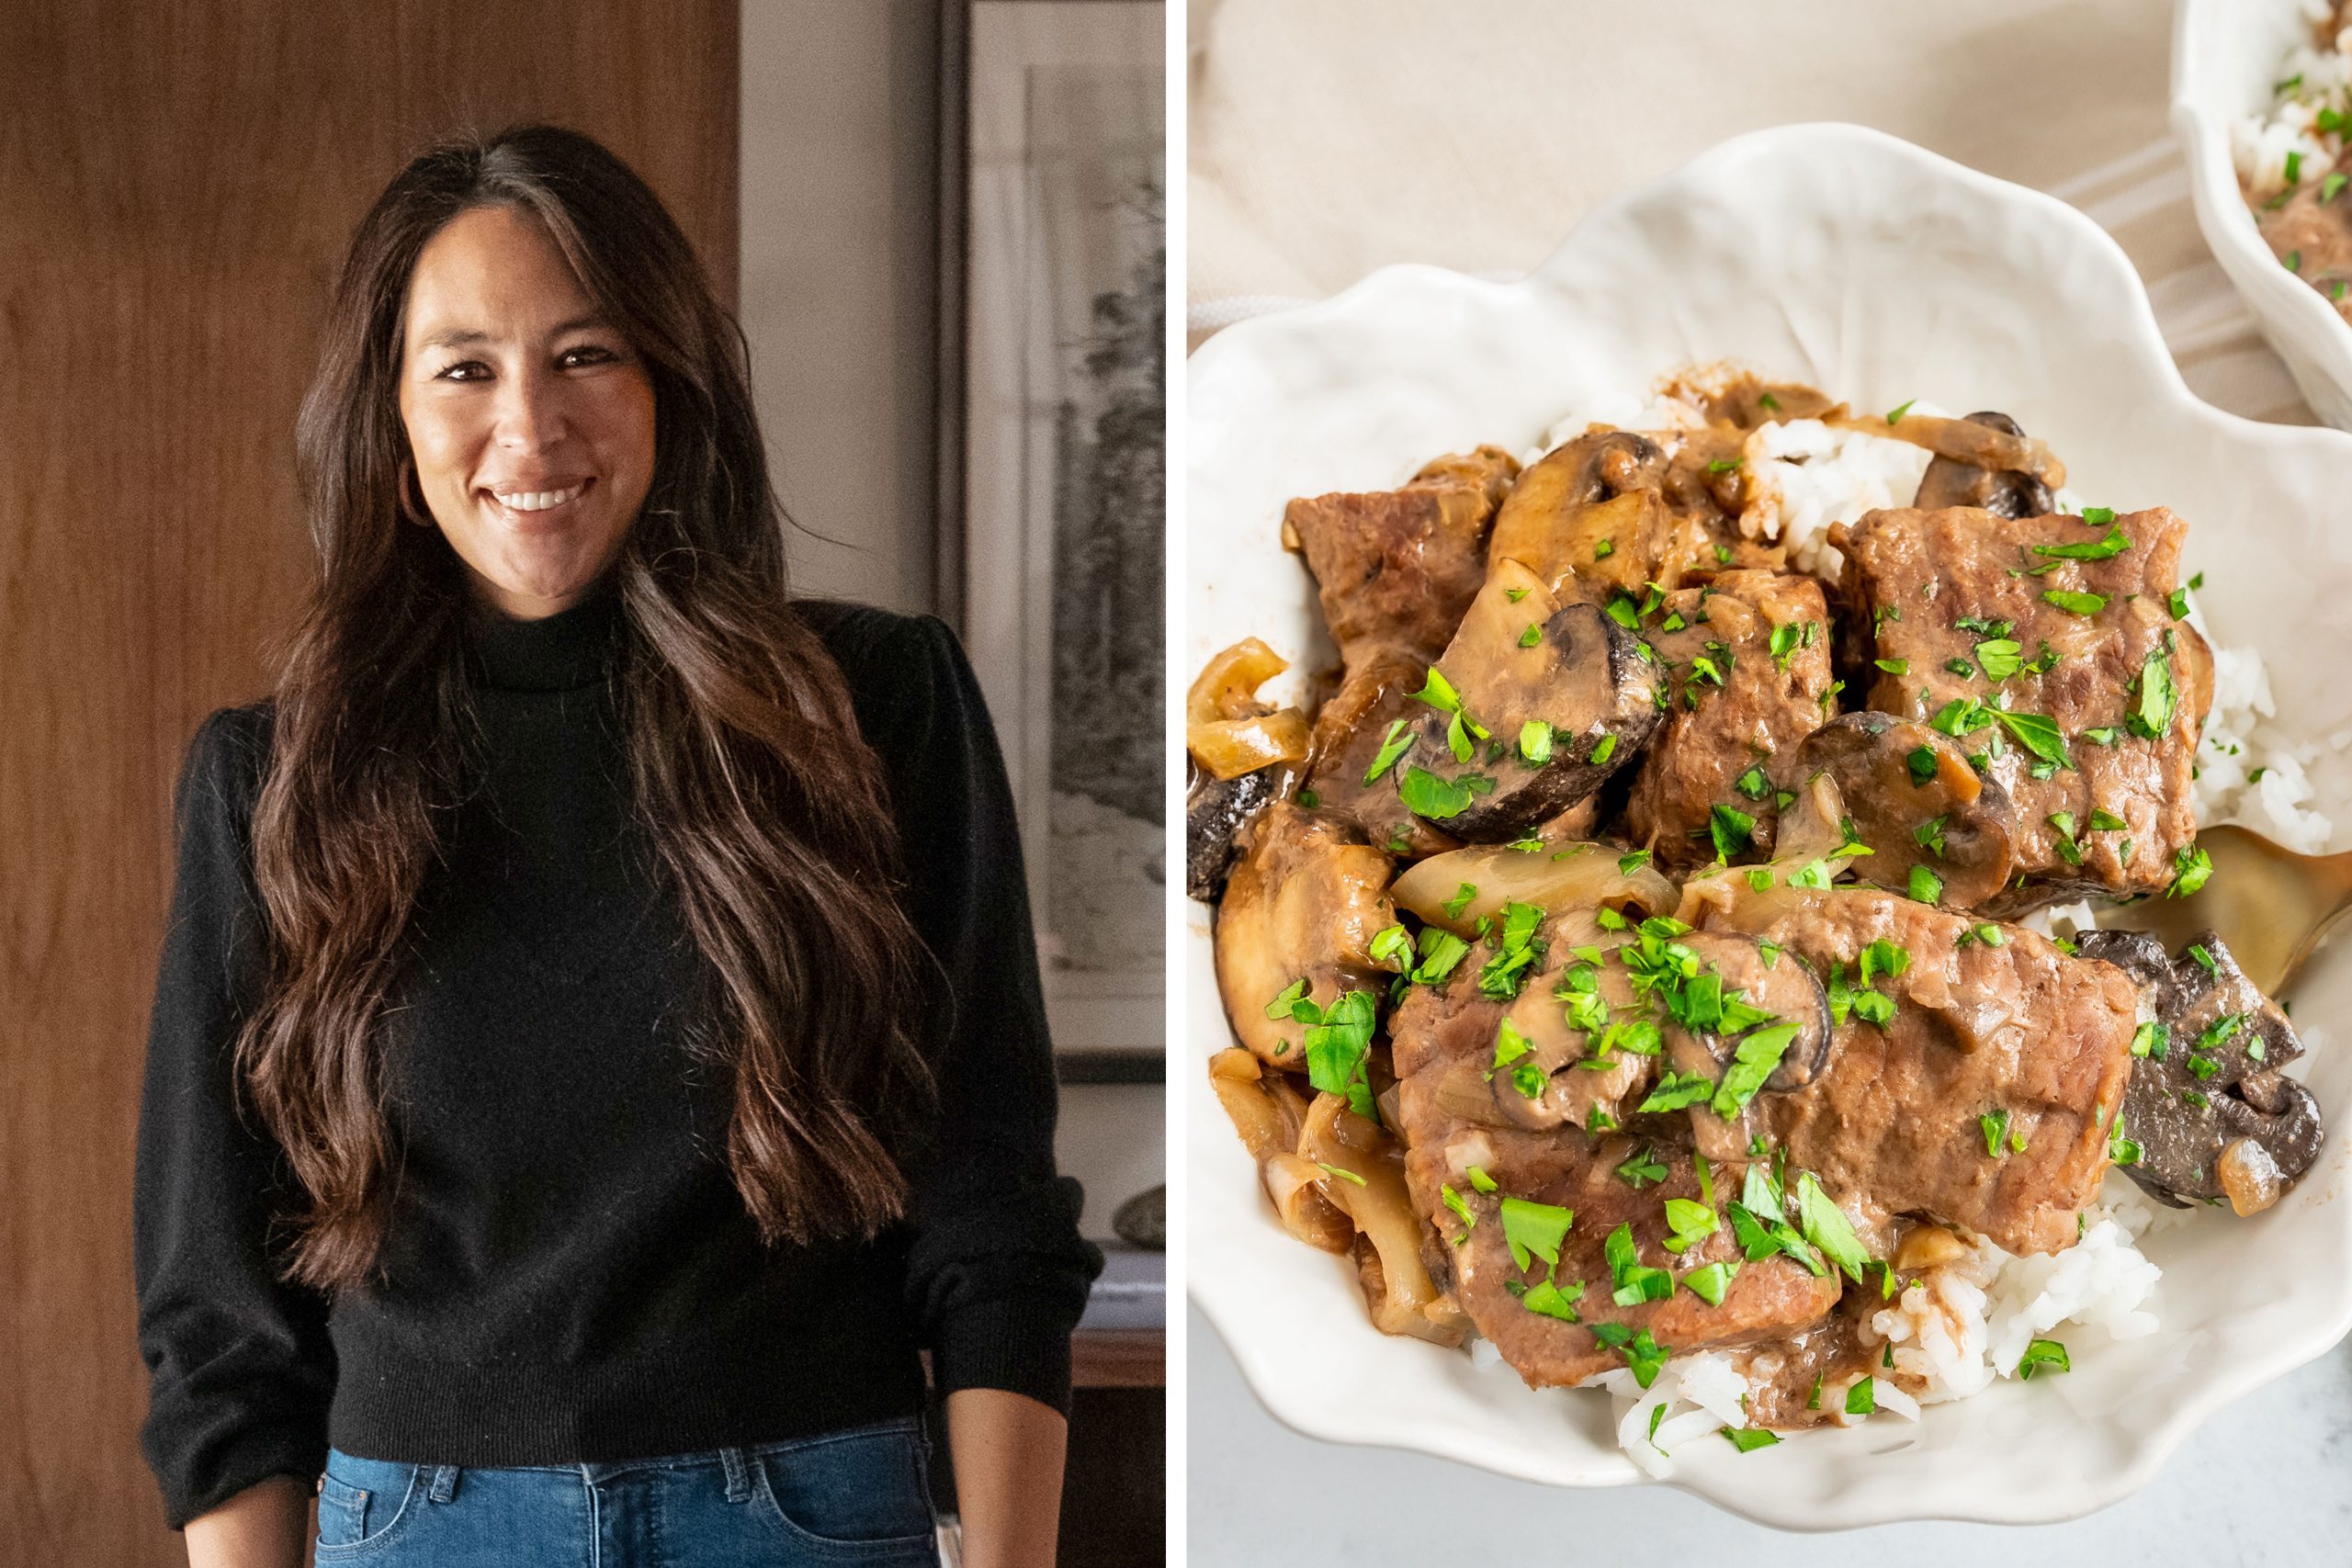 https://www.tasteofhome.com/wp-content/uploads/2022/02/HFXUP601_Reveal_0125_v2-Joanna-Gaines-Beef-Tips-ADedit-scaled.jpg